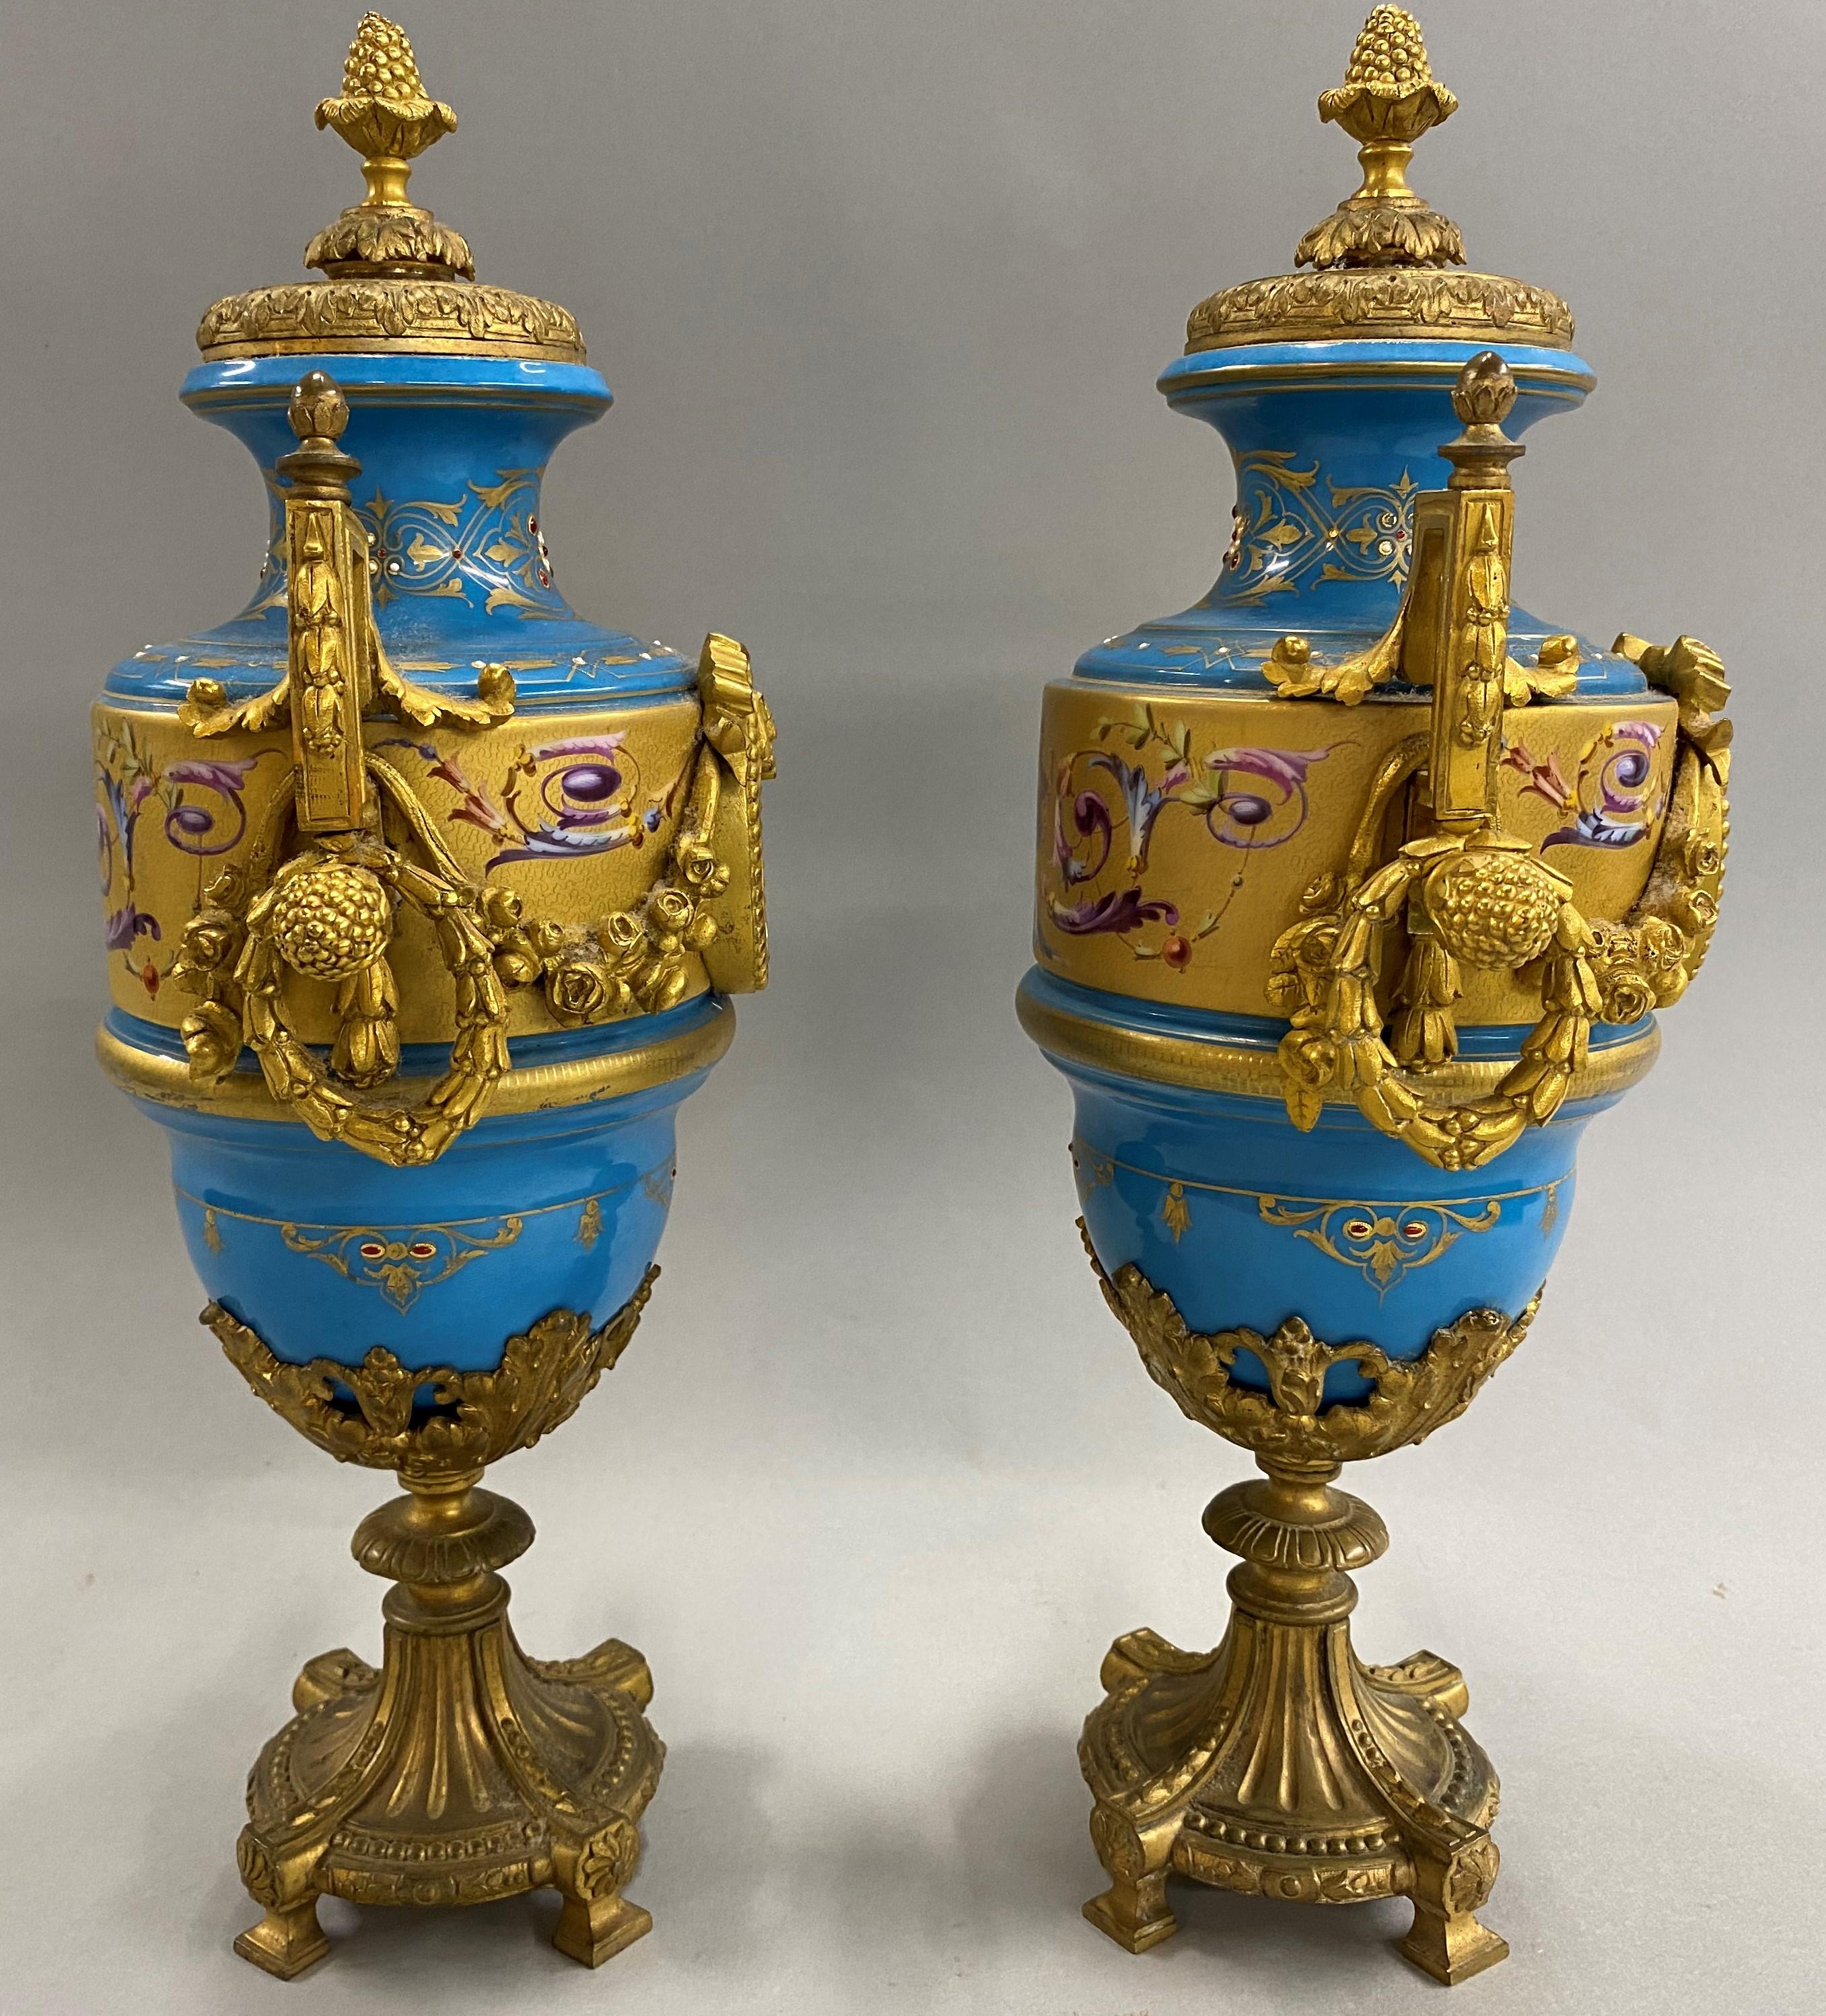 19th Century Pair of French Sevres Celeste Blue Porcelain Urns with Gilt Ormolu 5